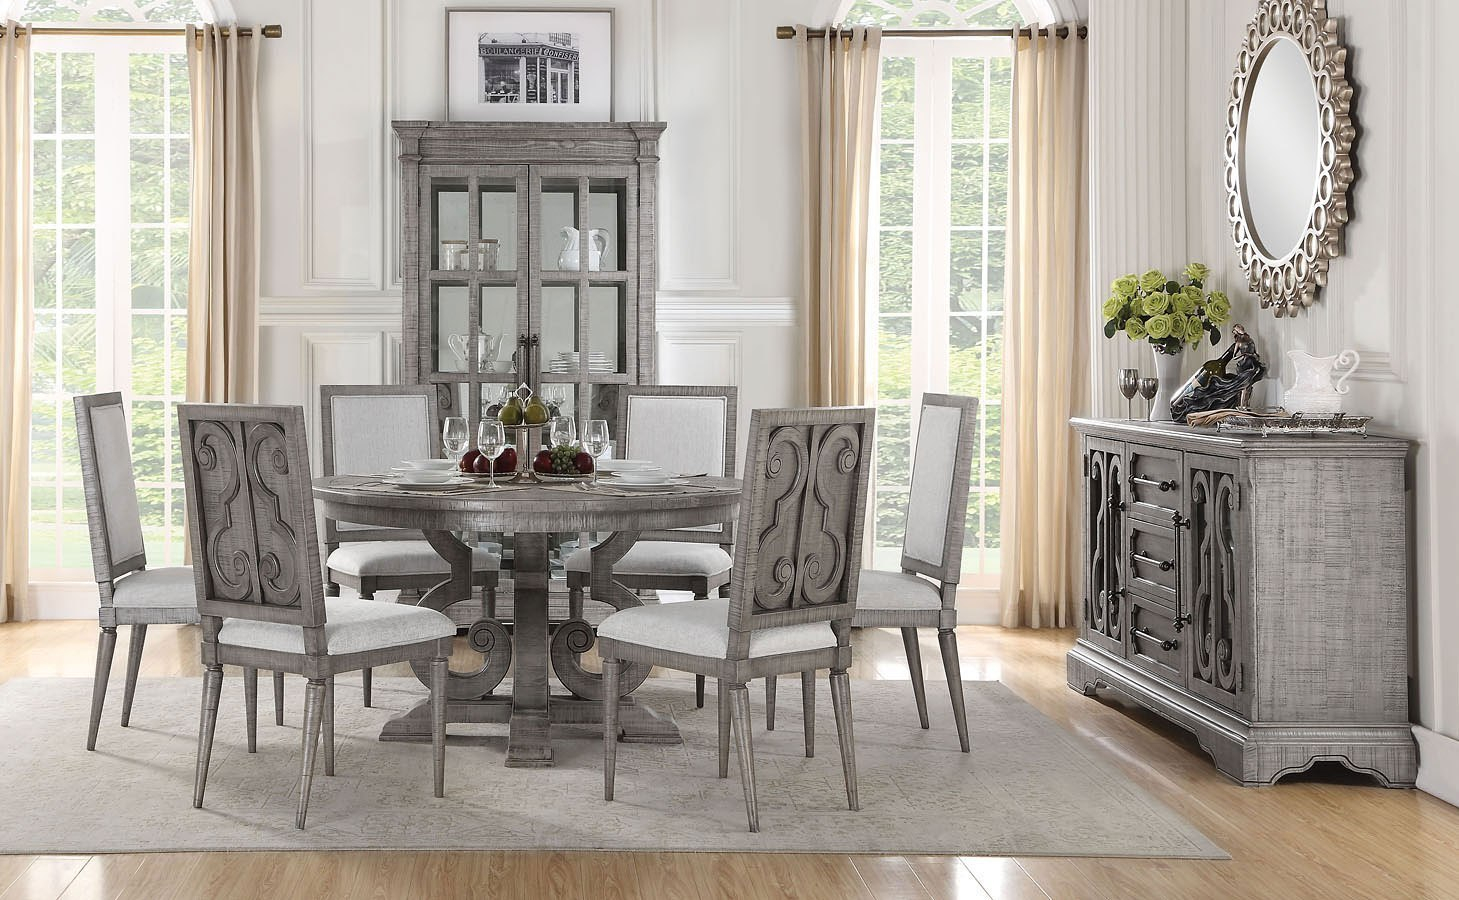 Artesia Round Dining Room Set with regard to dimensions 1459 X 900